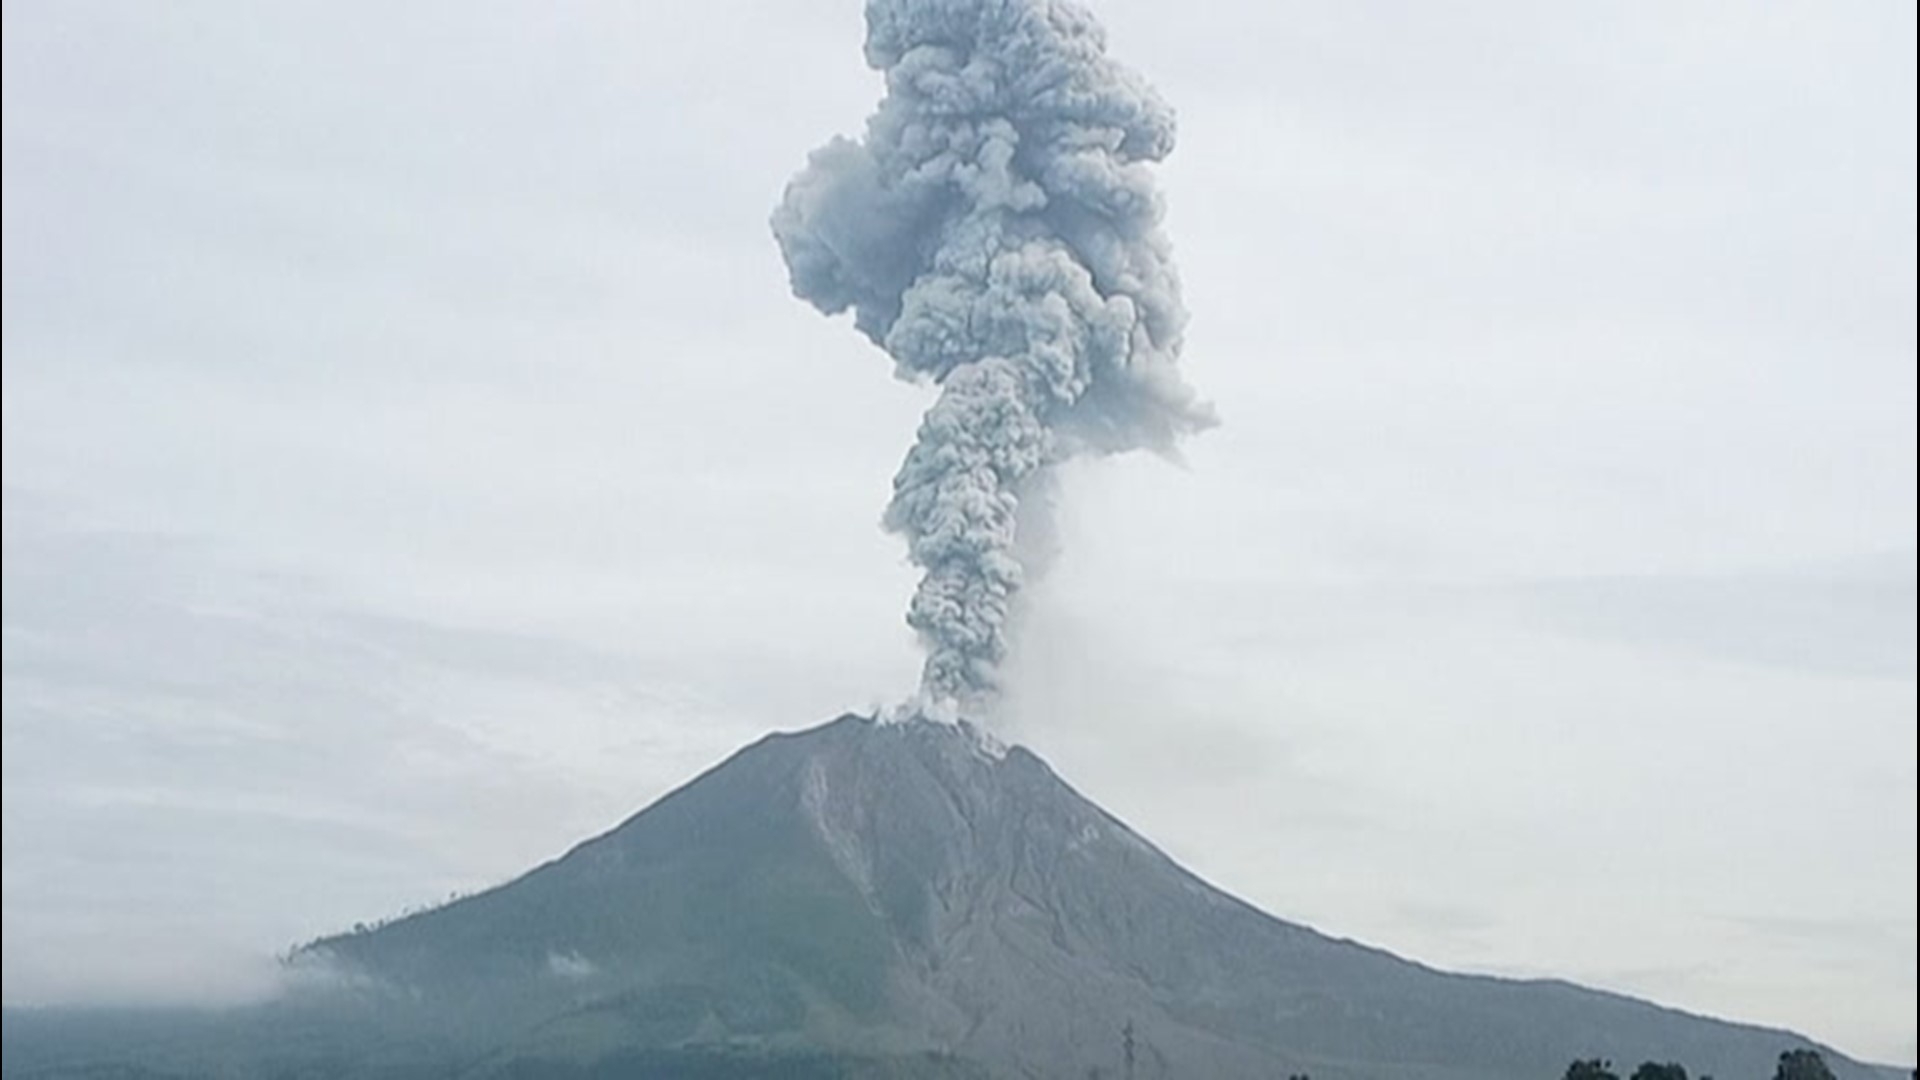 Indonesia's Mount Sinabung erupted on May 7, spewing ash and debris thousands of feet into the sky.